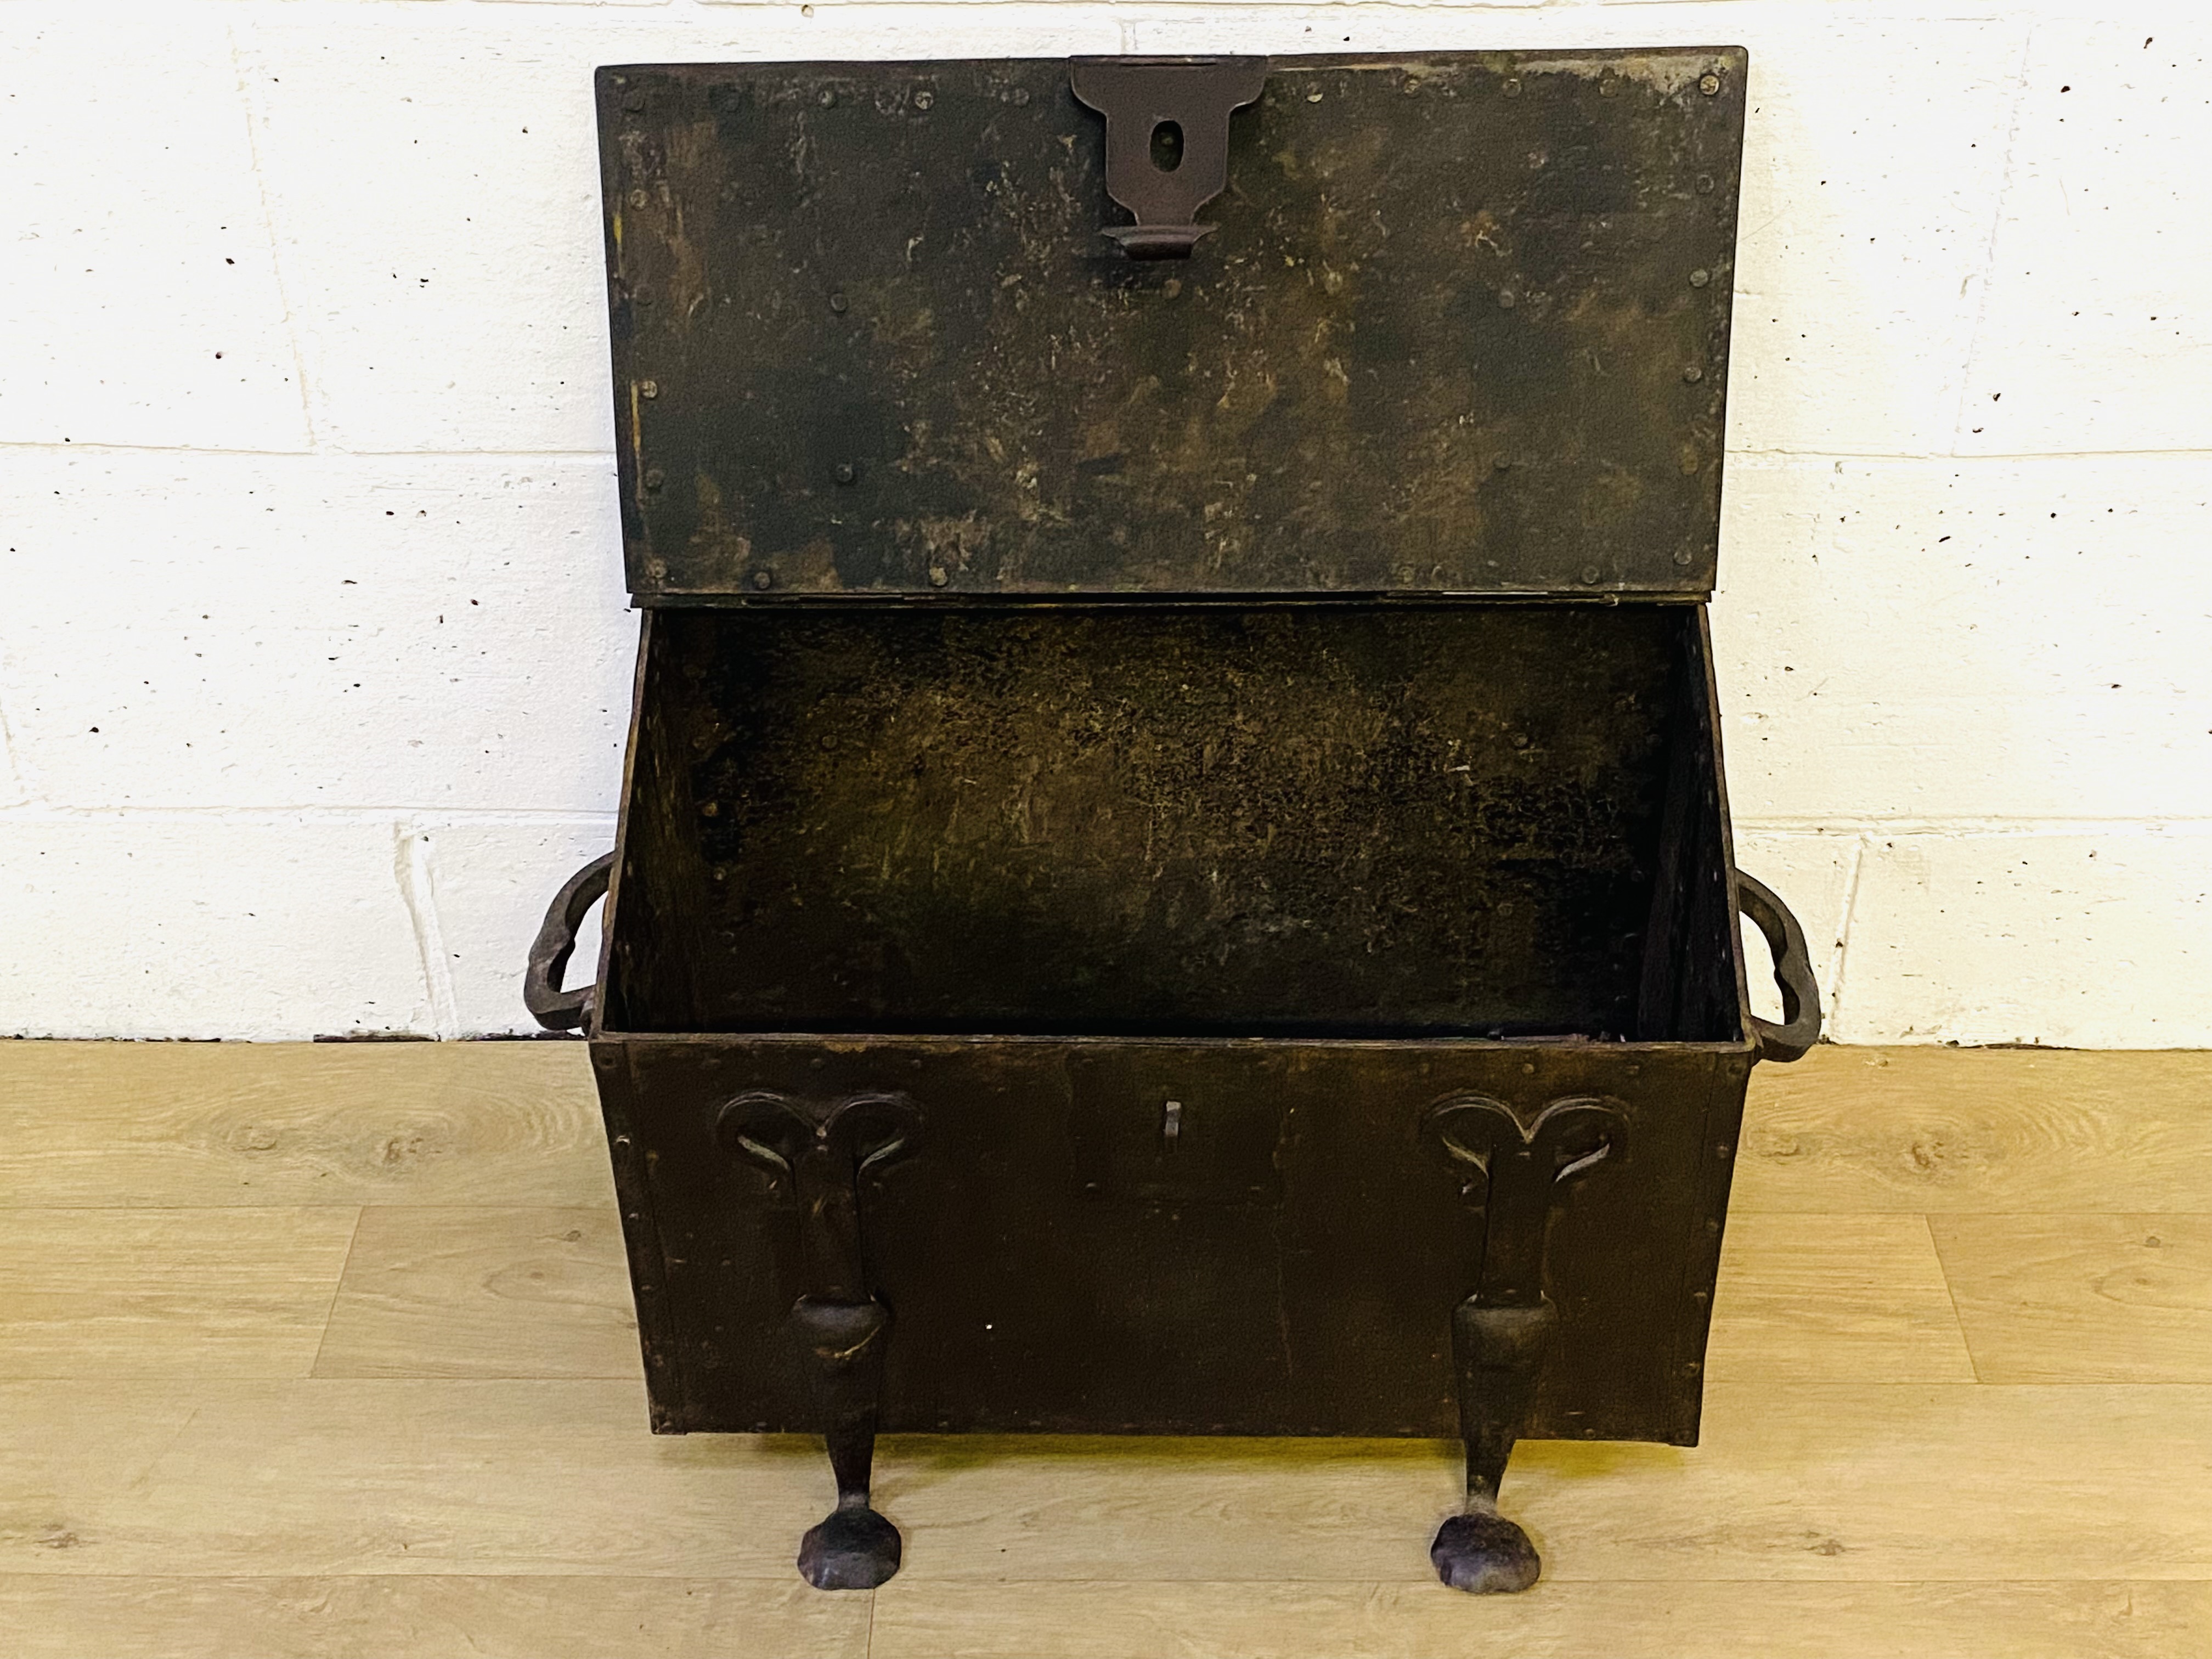 Arts and Crafts style steel coal box - Image 5 of 5